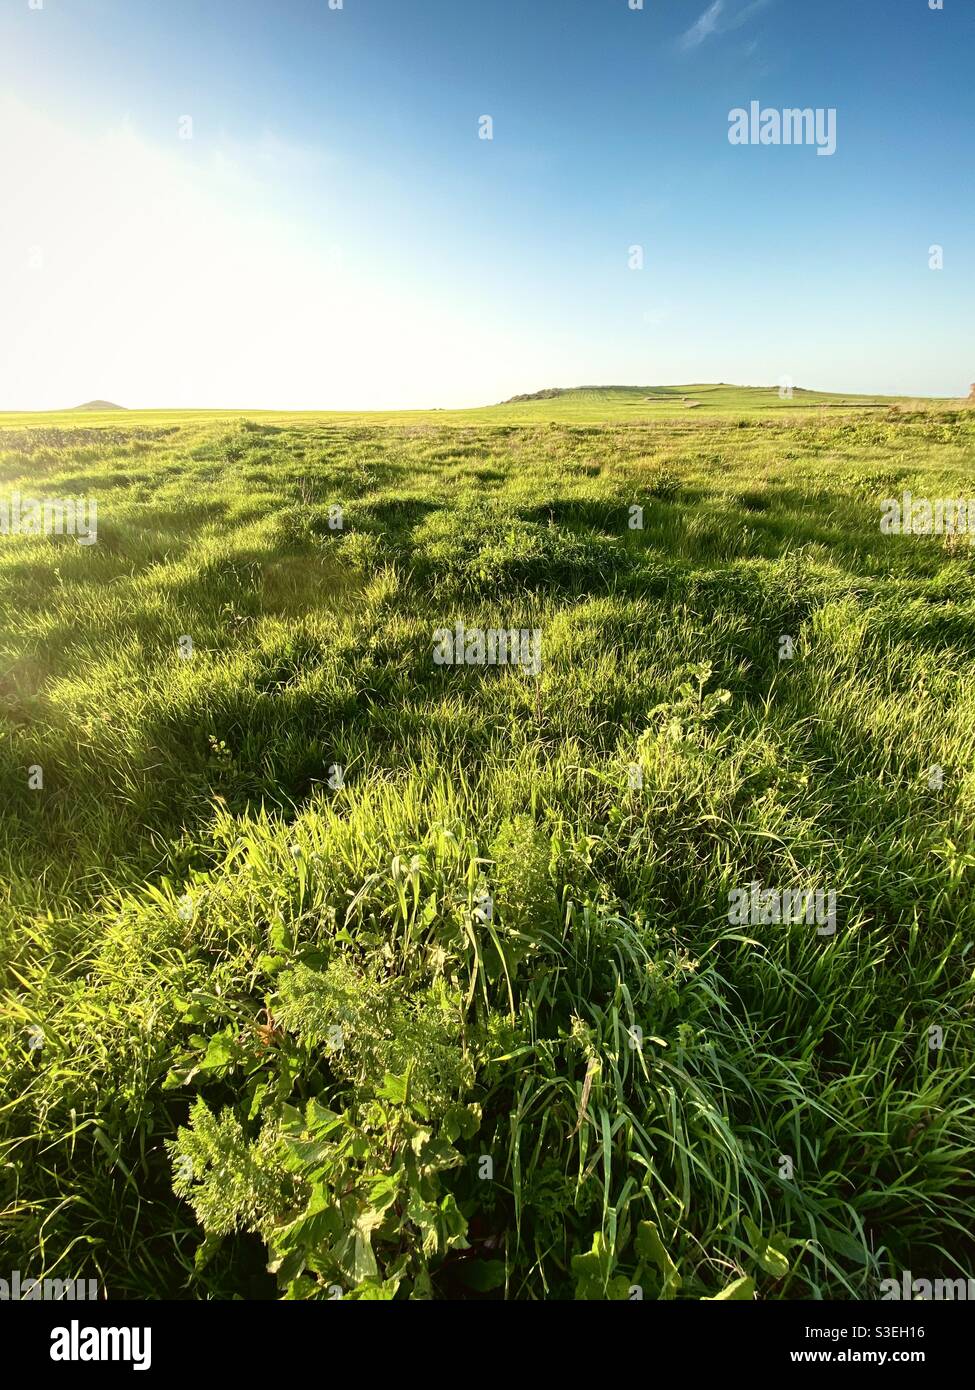 A green grassland field lighted by a bright sunlight. Stock Photo